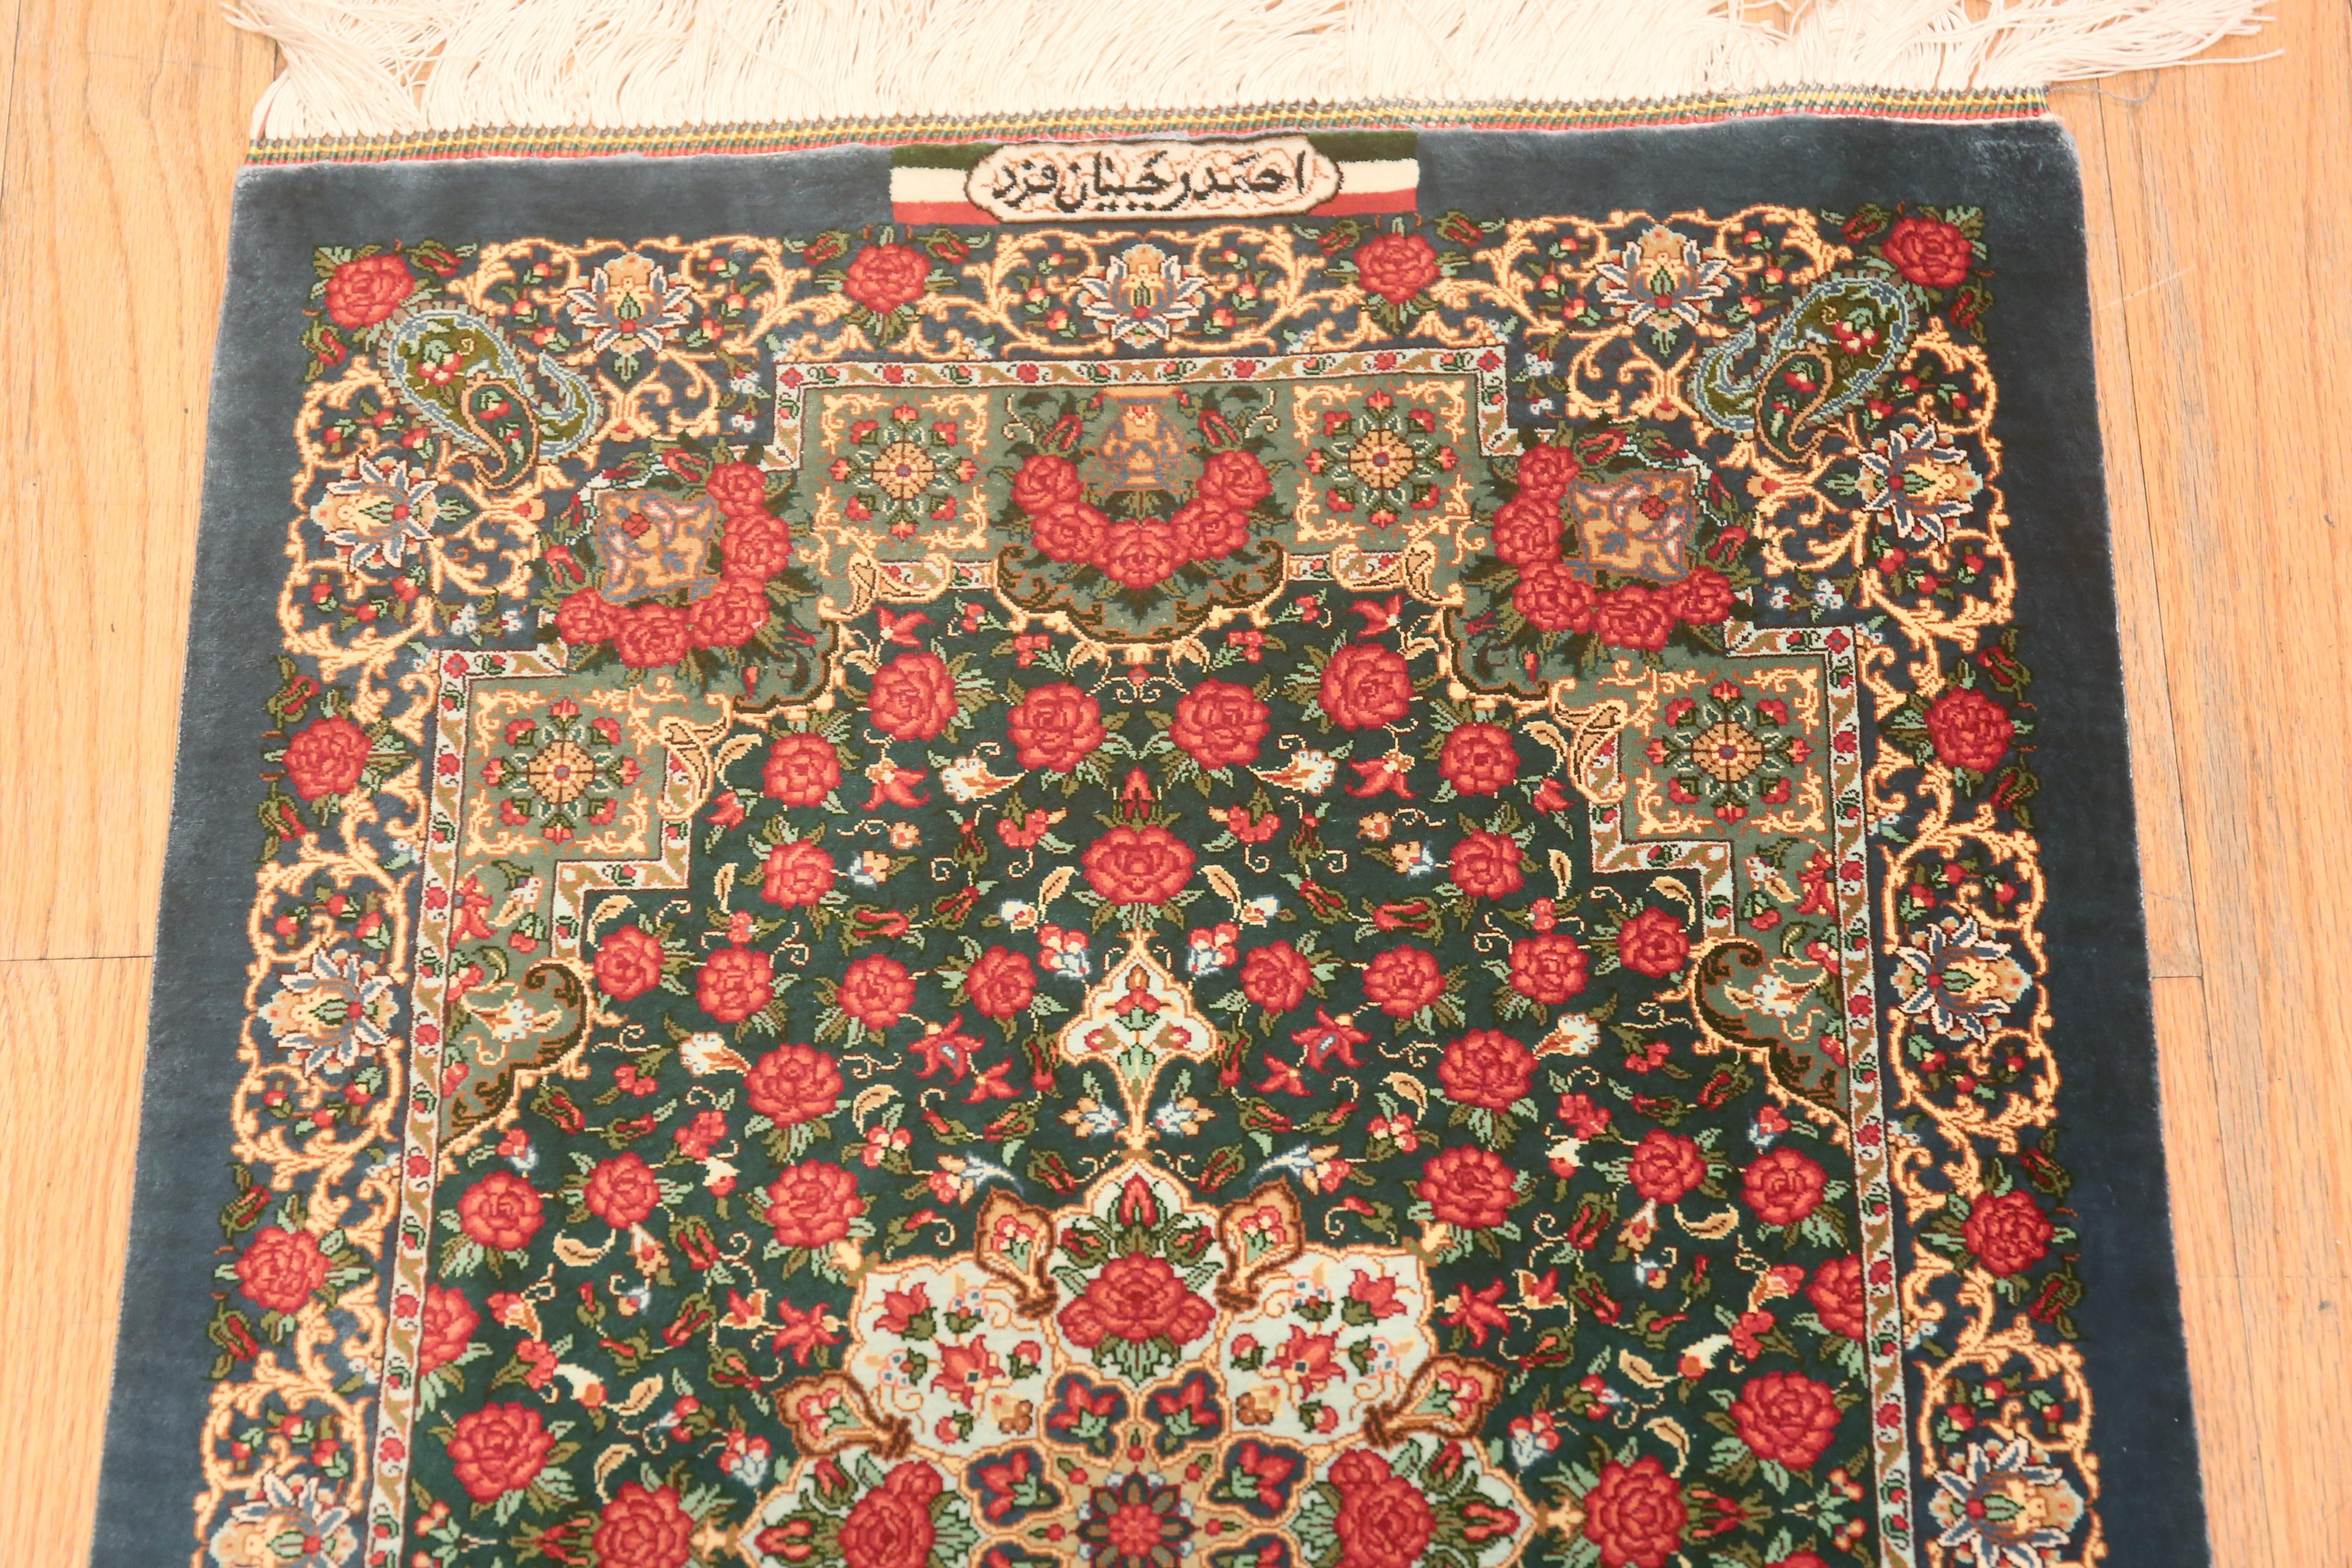 Fine Small Green Floral Vintage Persian Silk Qum Rug 2' x 3' In Good Condition For Sale In New York, NY